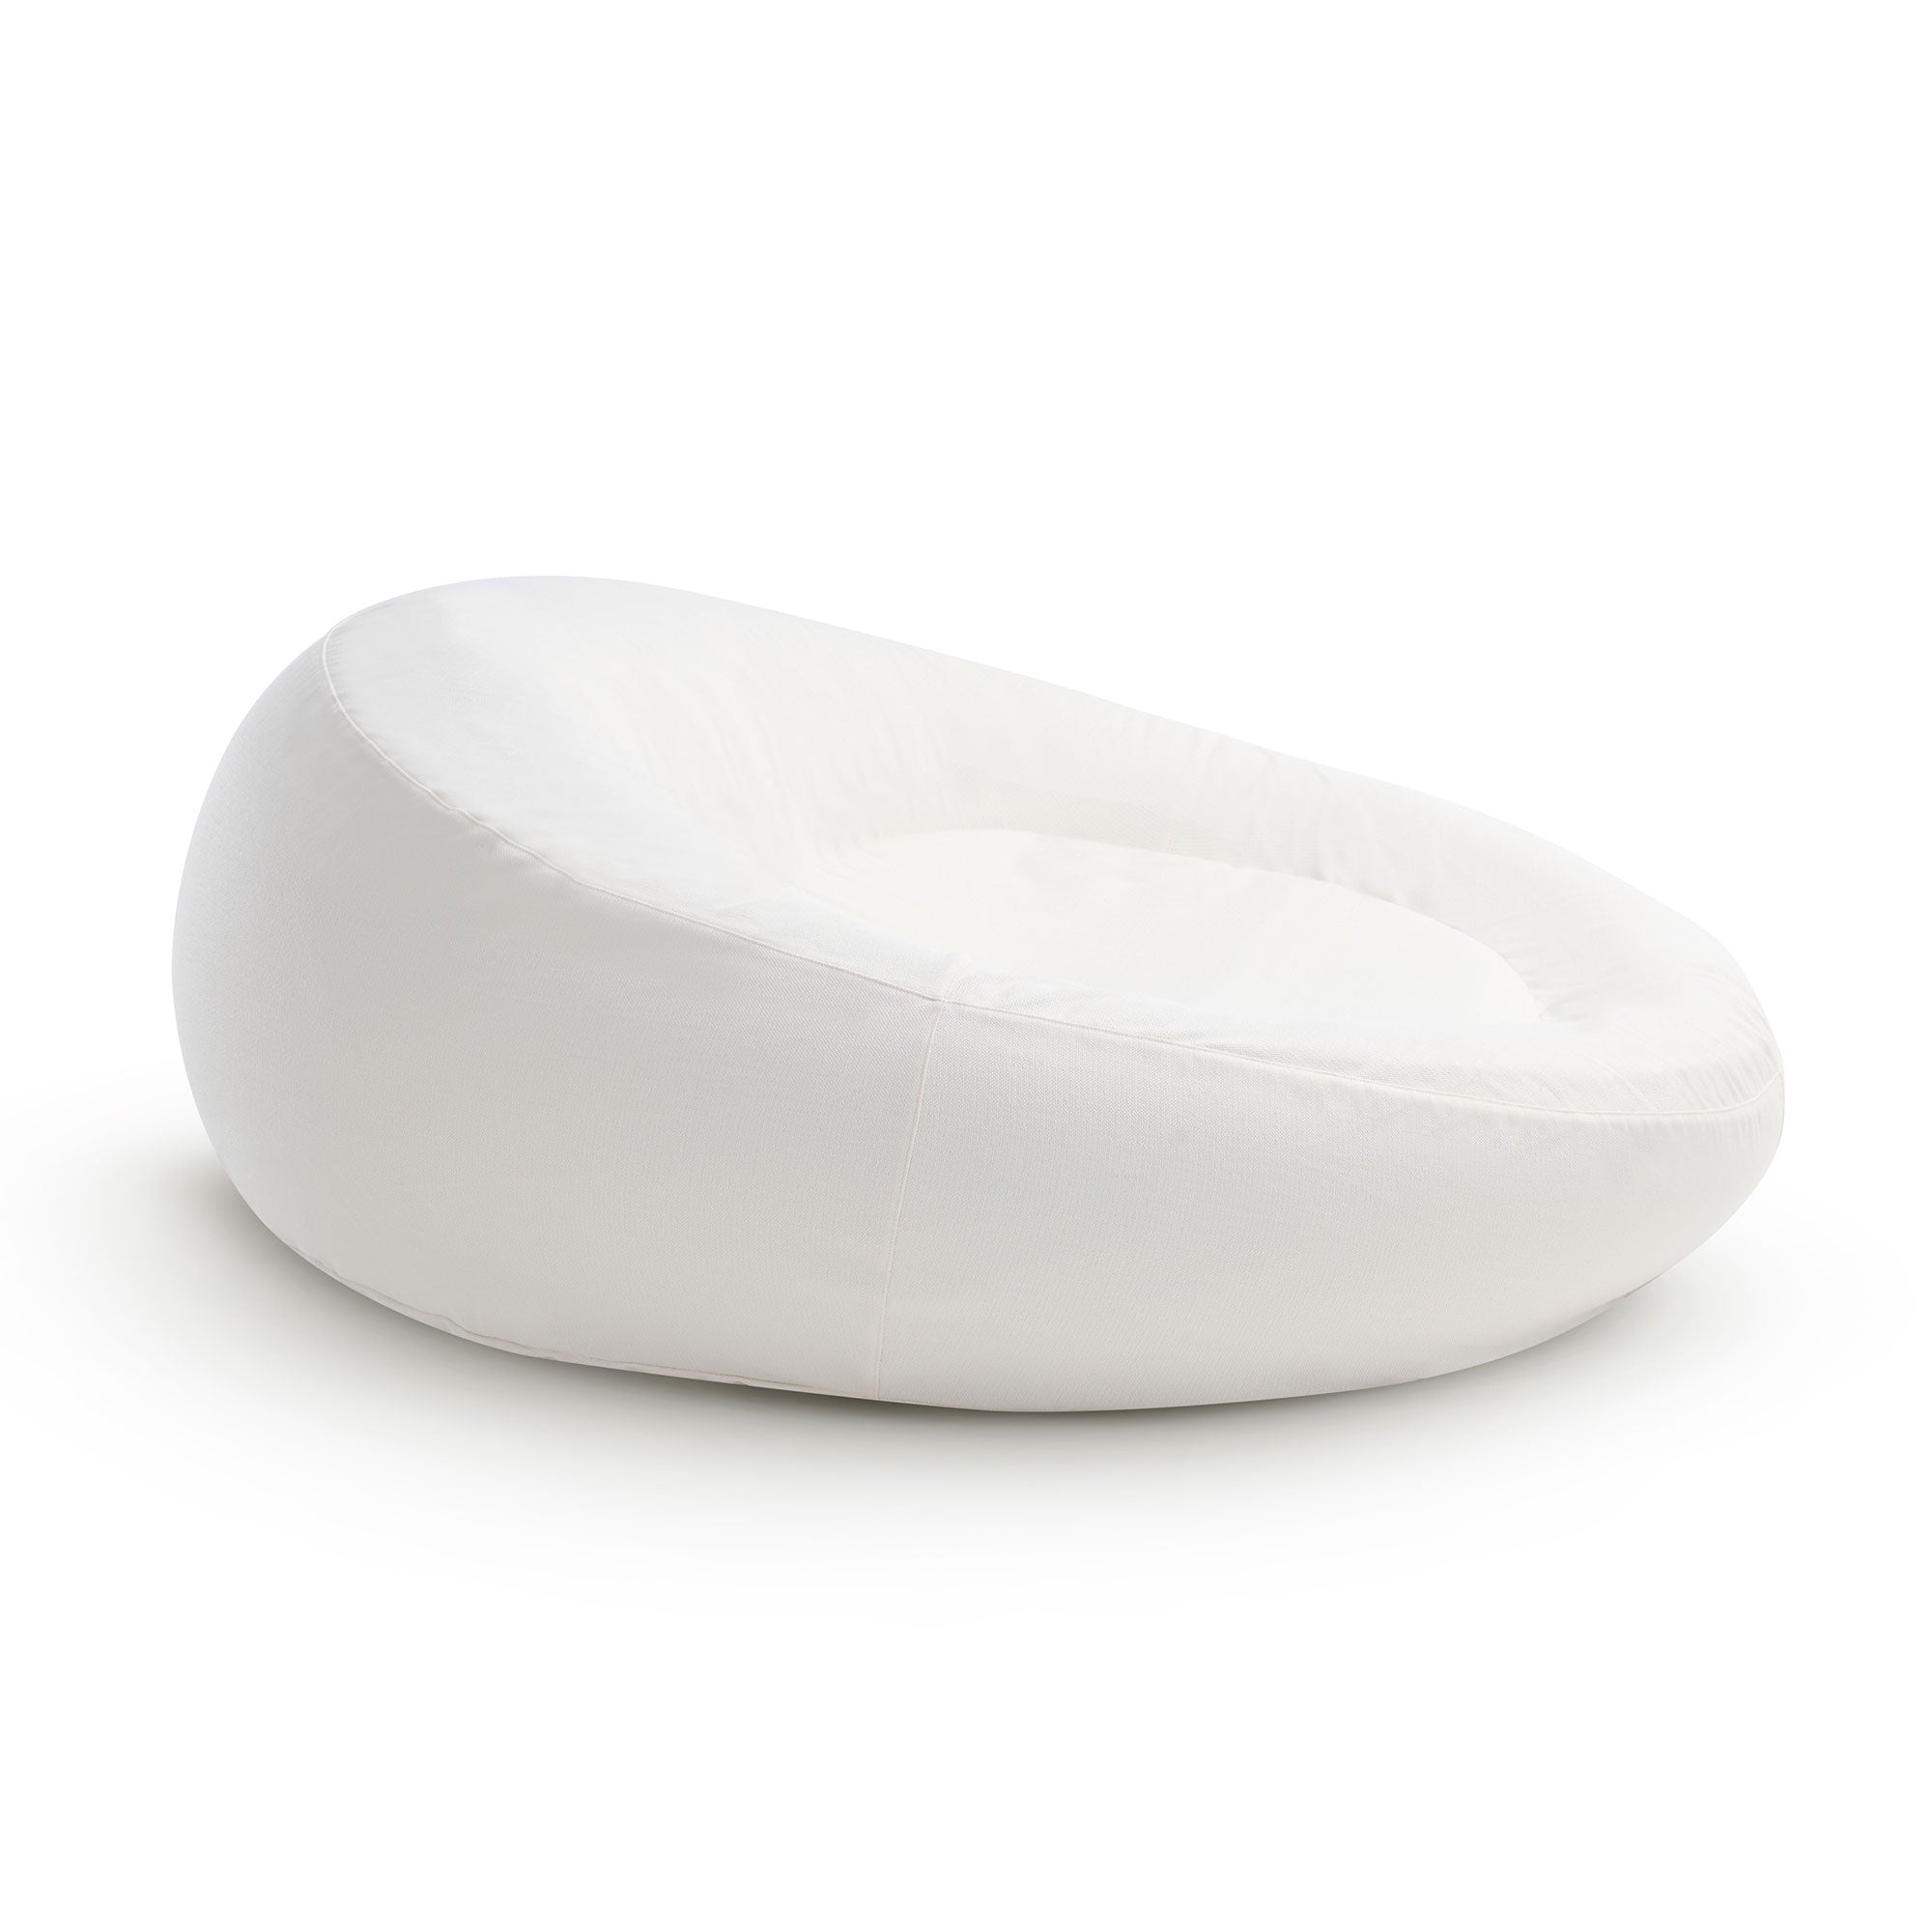 Daybed Coconut 003